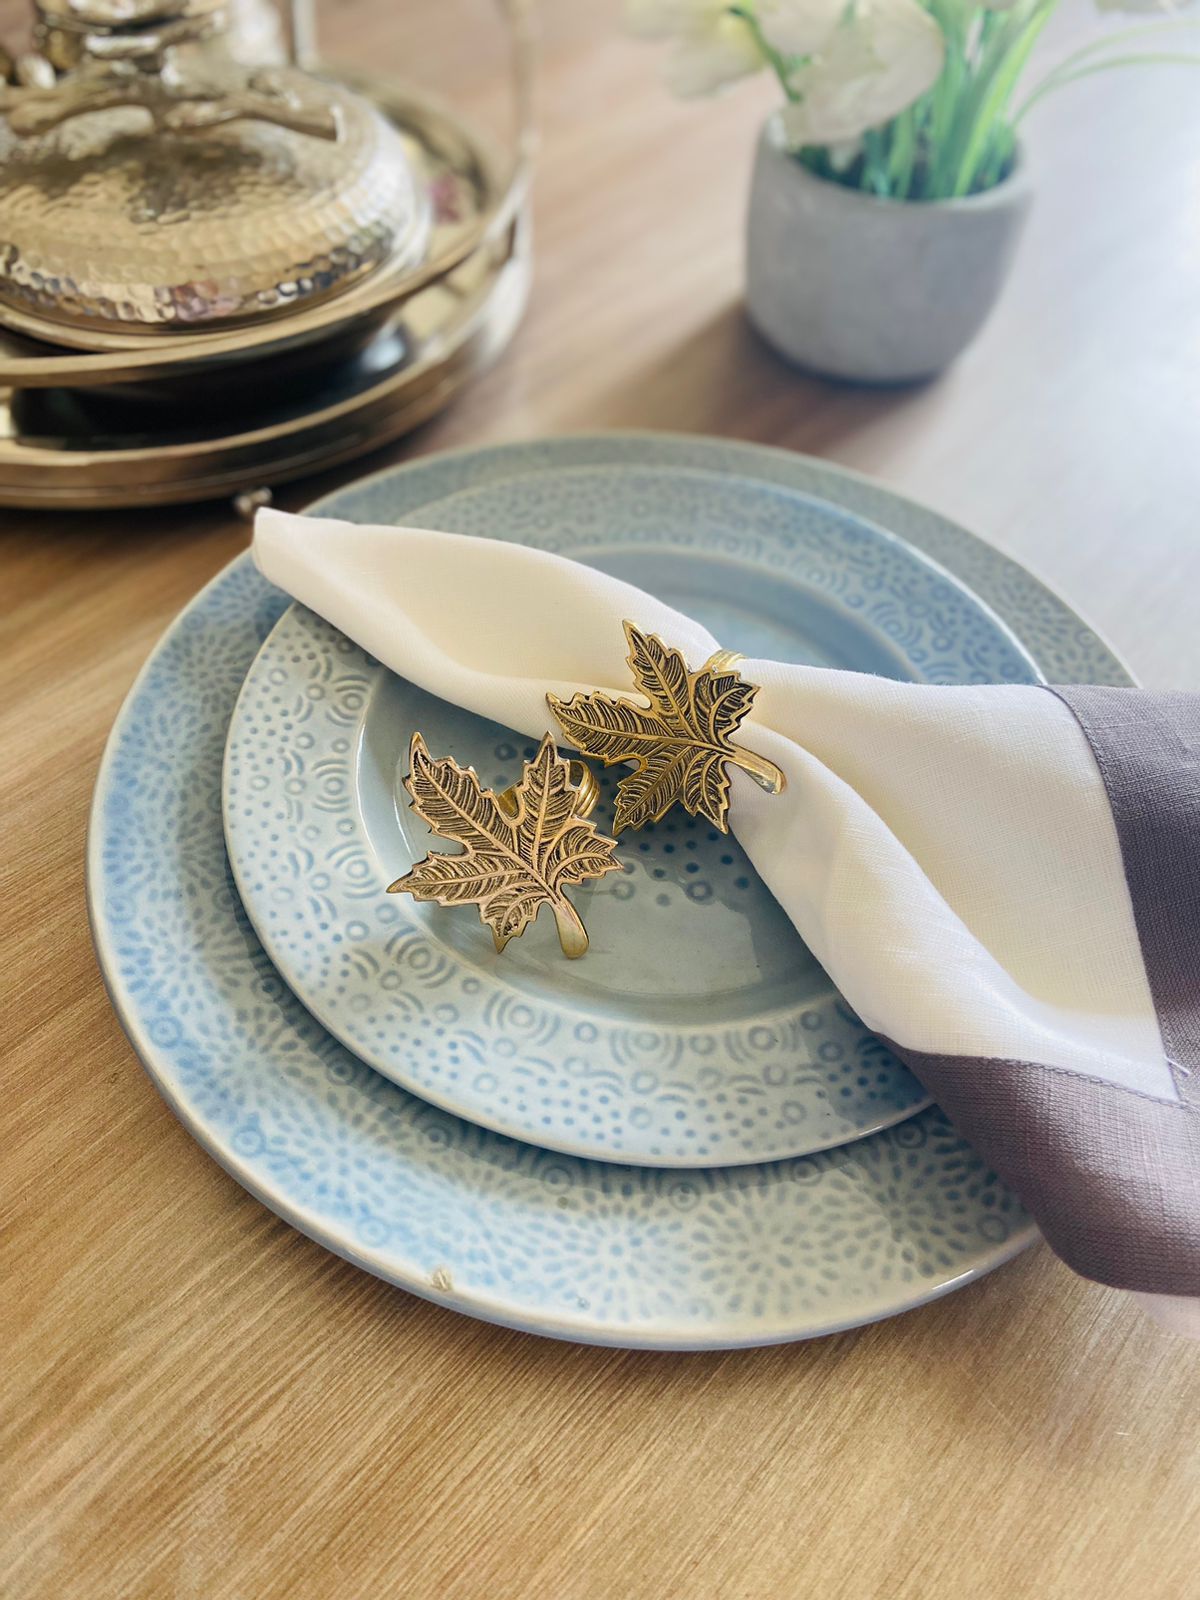 Napkin Rings - Maple Leaf - Set of 6 l Leaf napkin rings l Fall-themed napkin rings l Table Decor with leaves l Brass leaf napkin rings